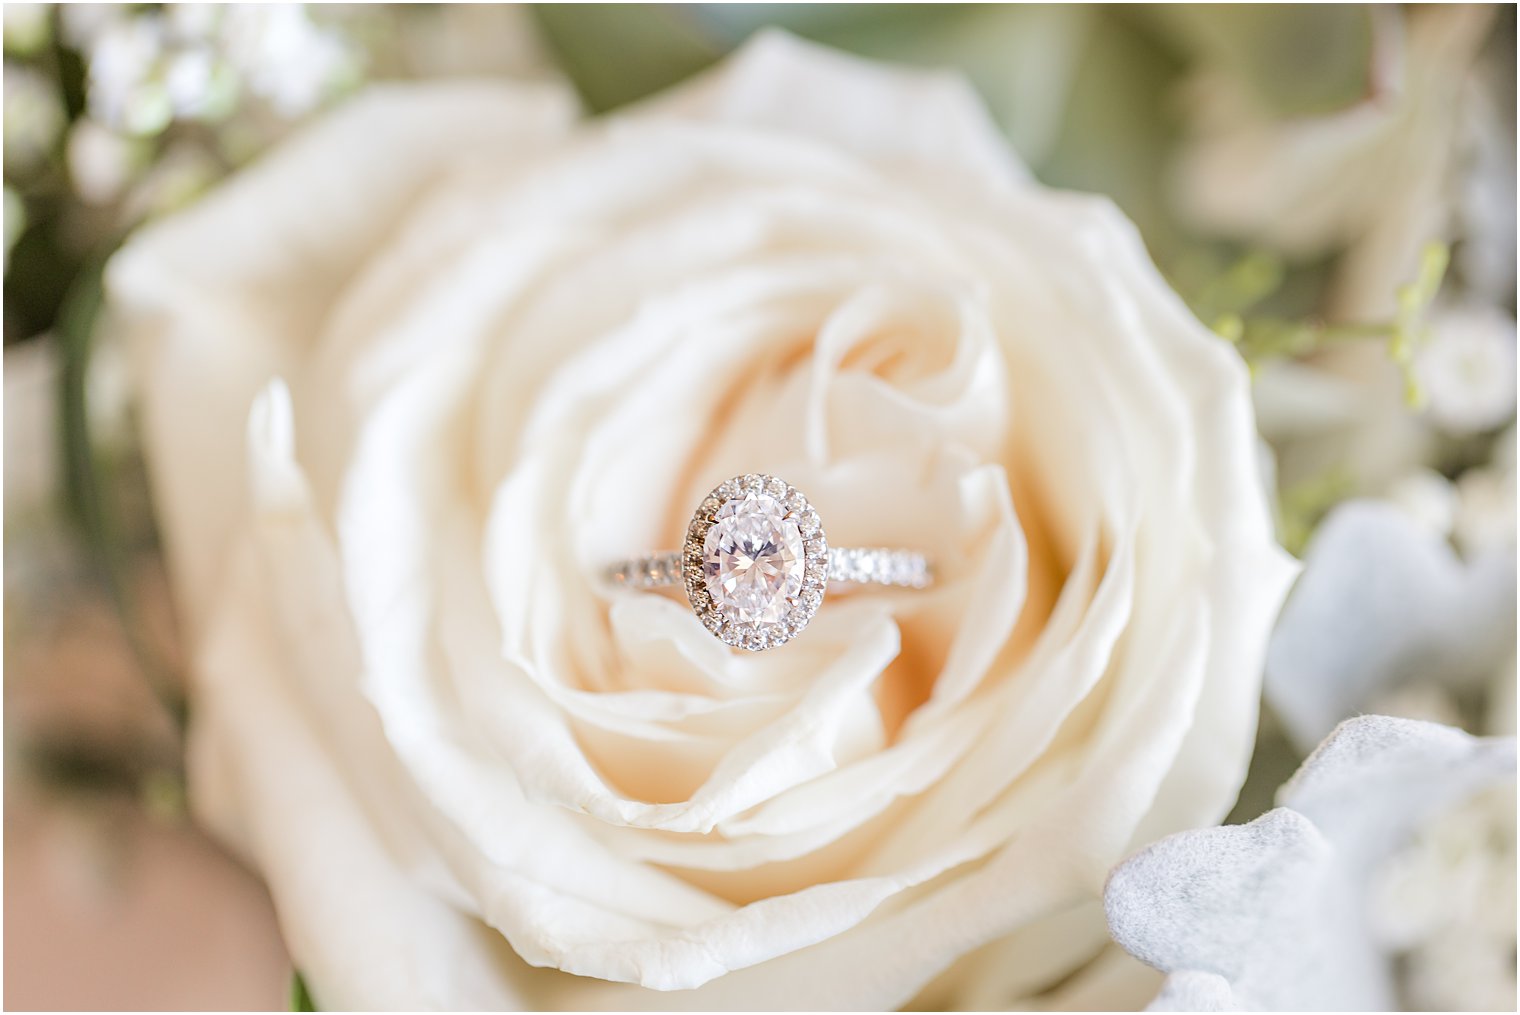 oval diamond ring rests in ivory rose